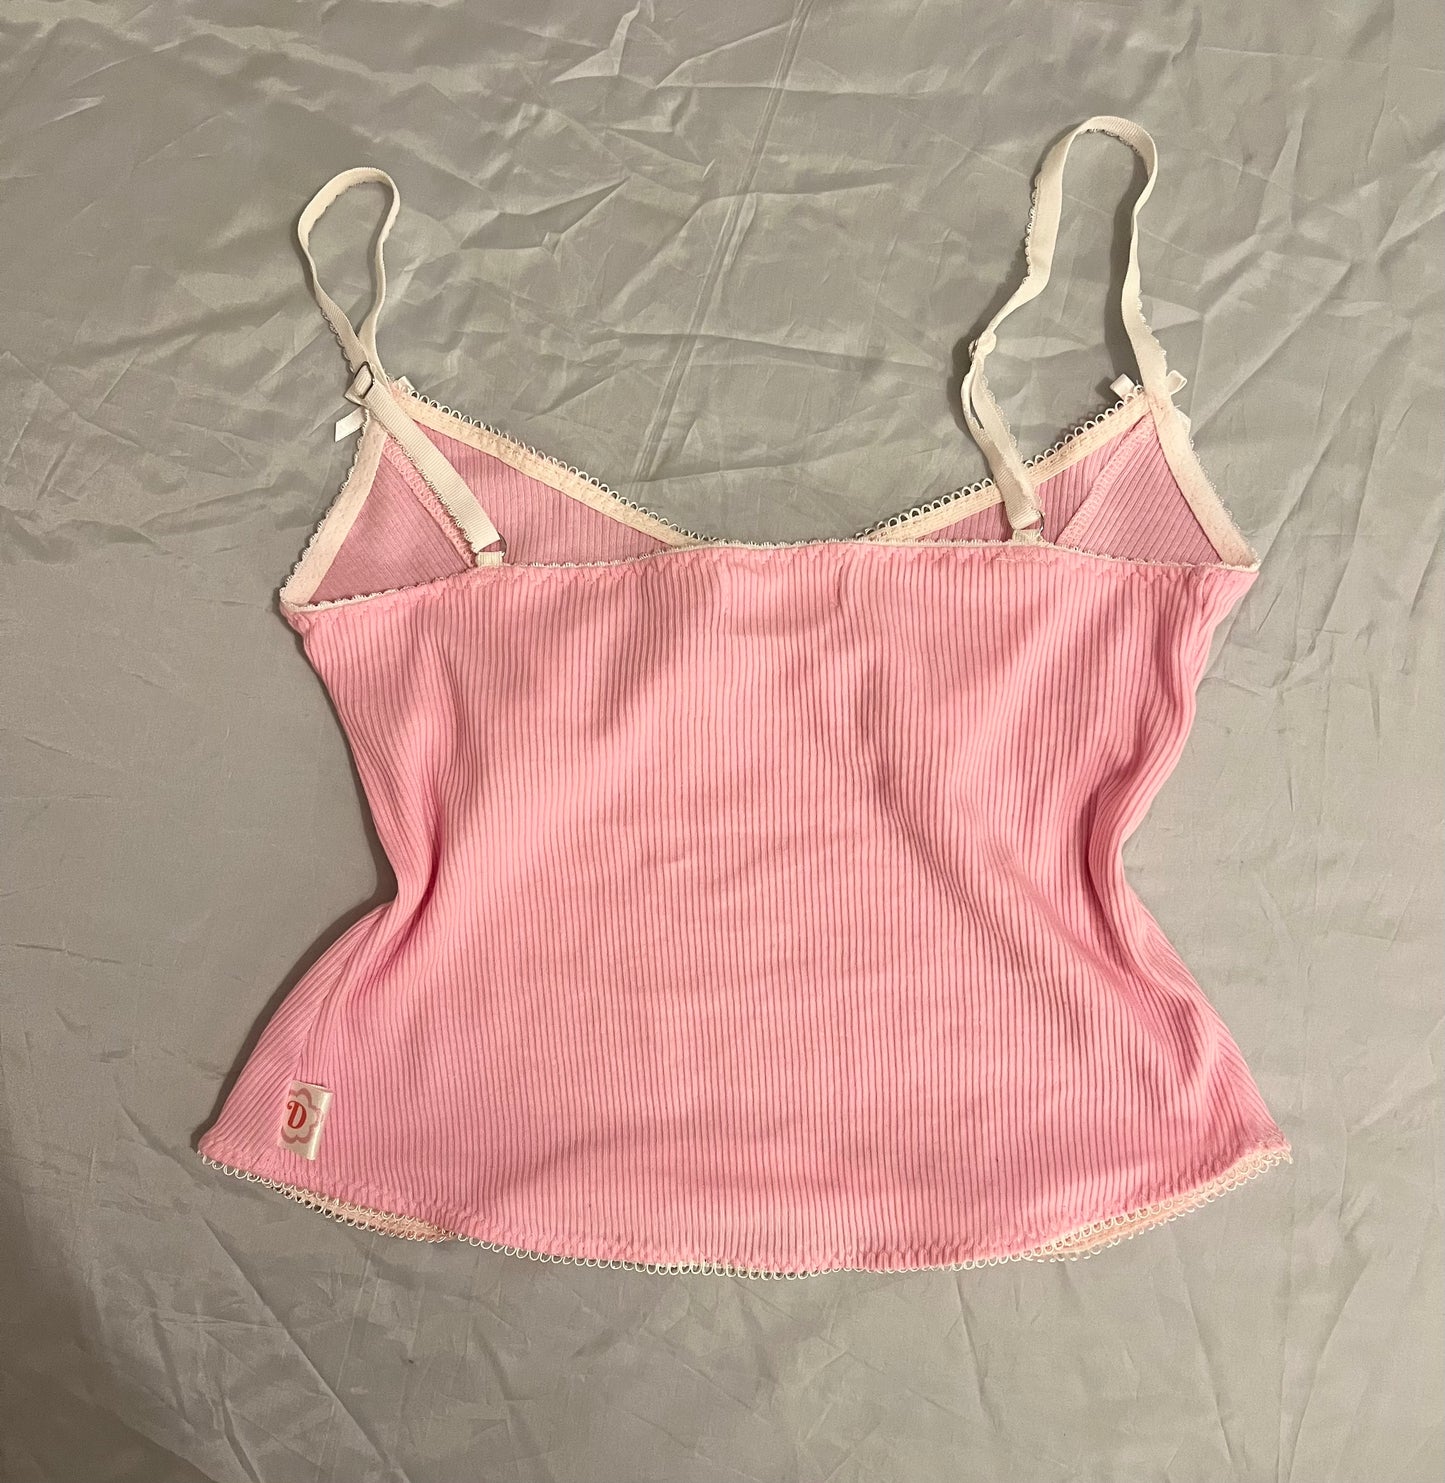 The Pink - Isabella Top